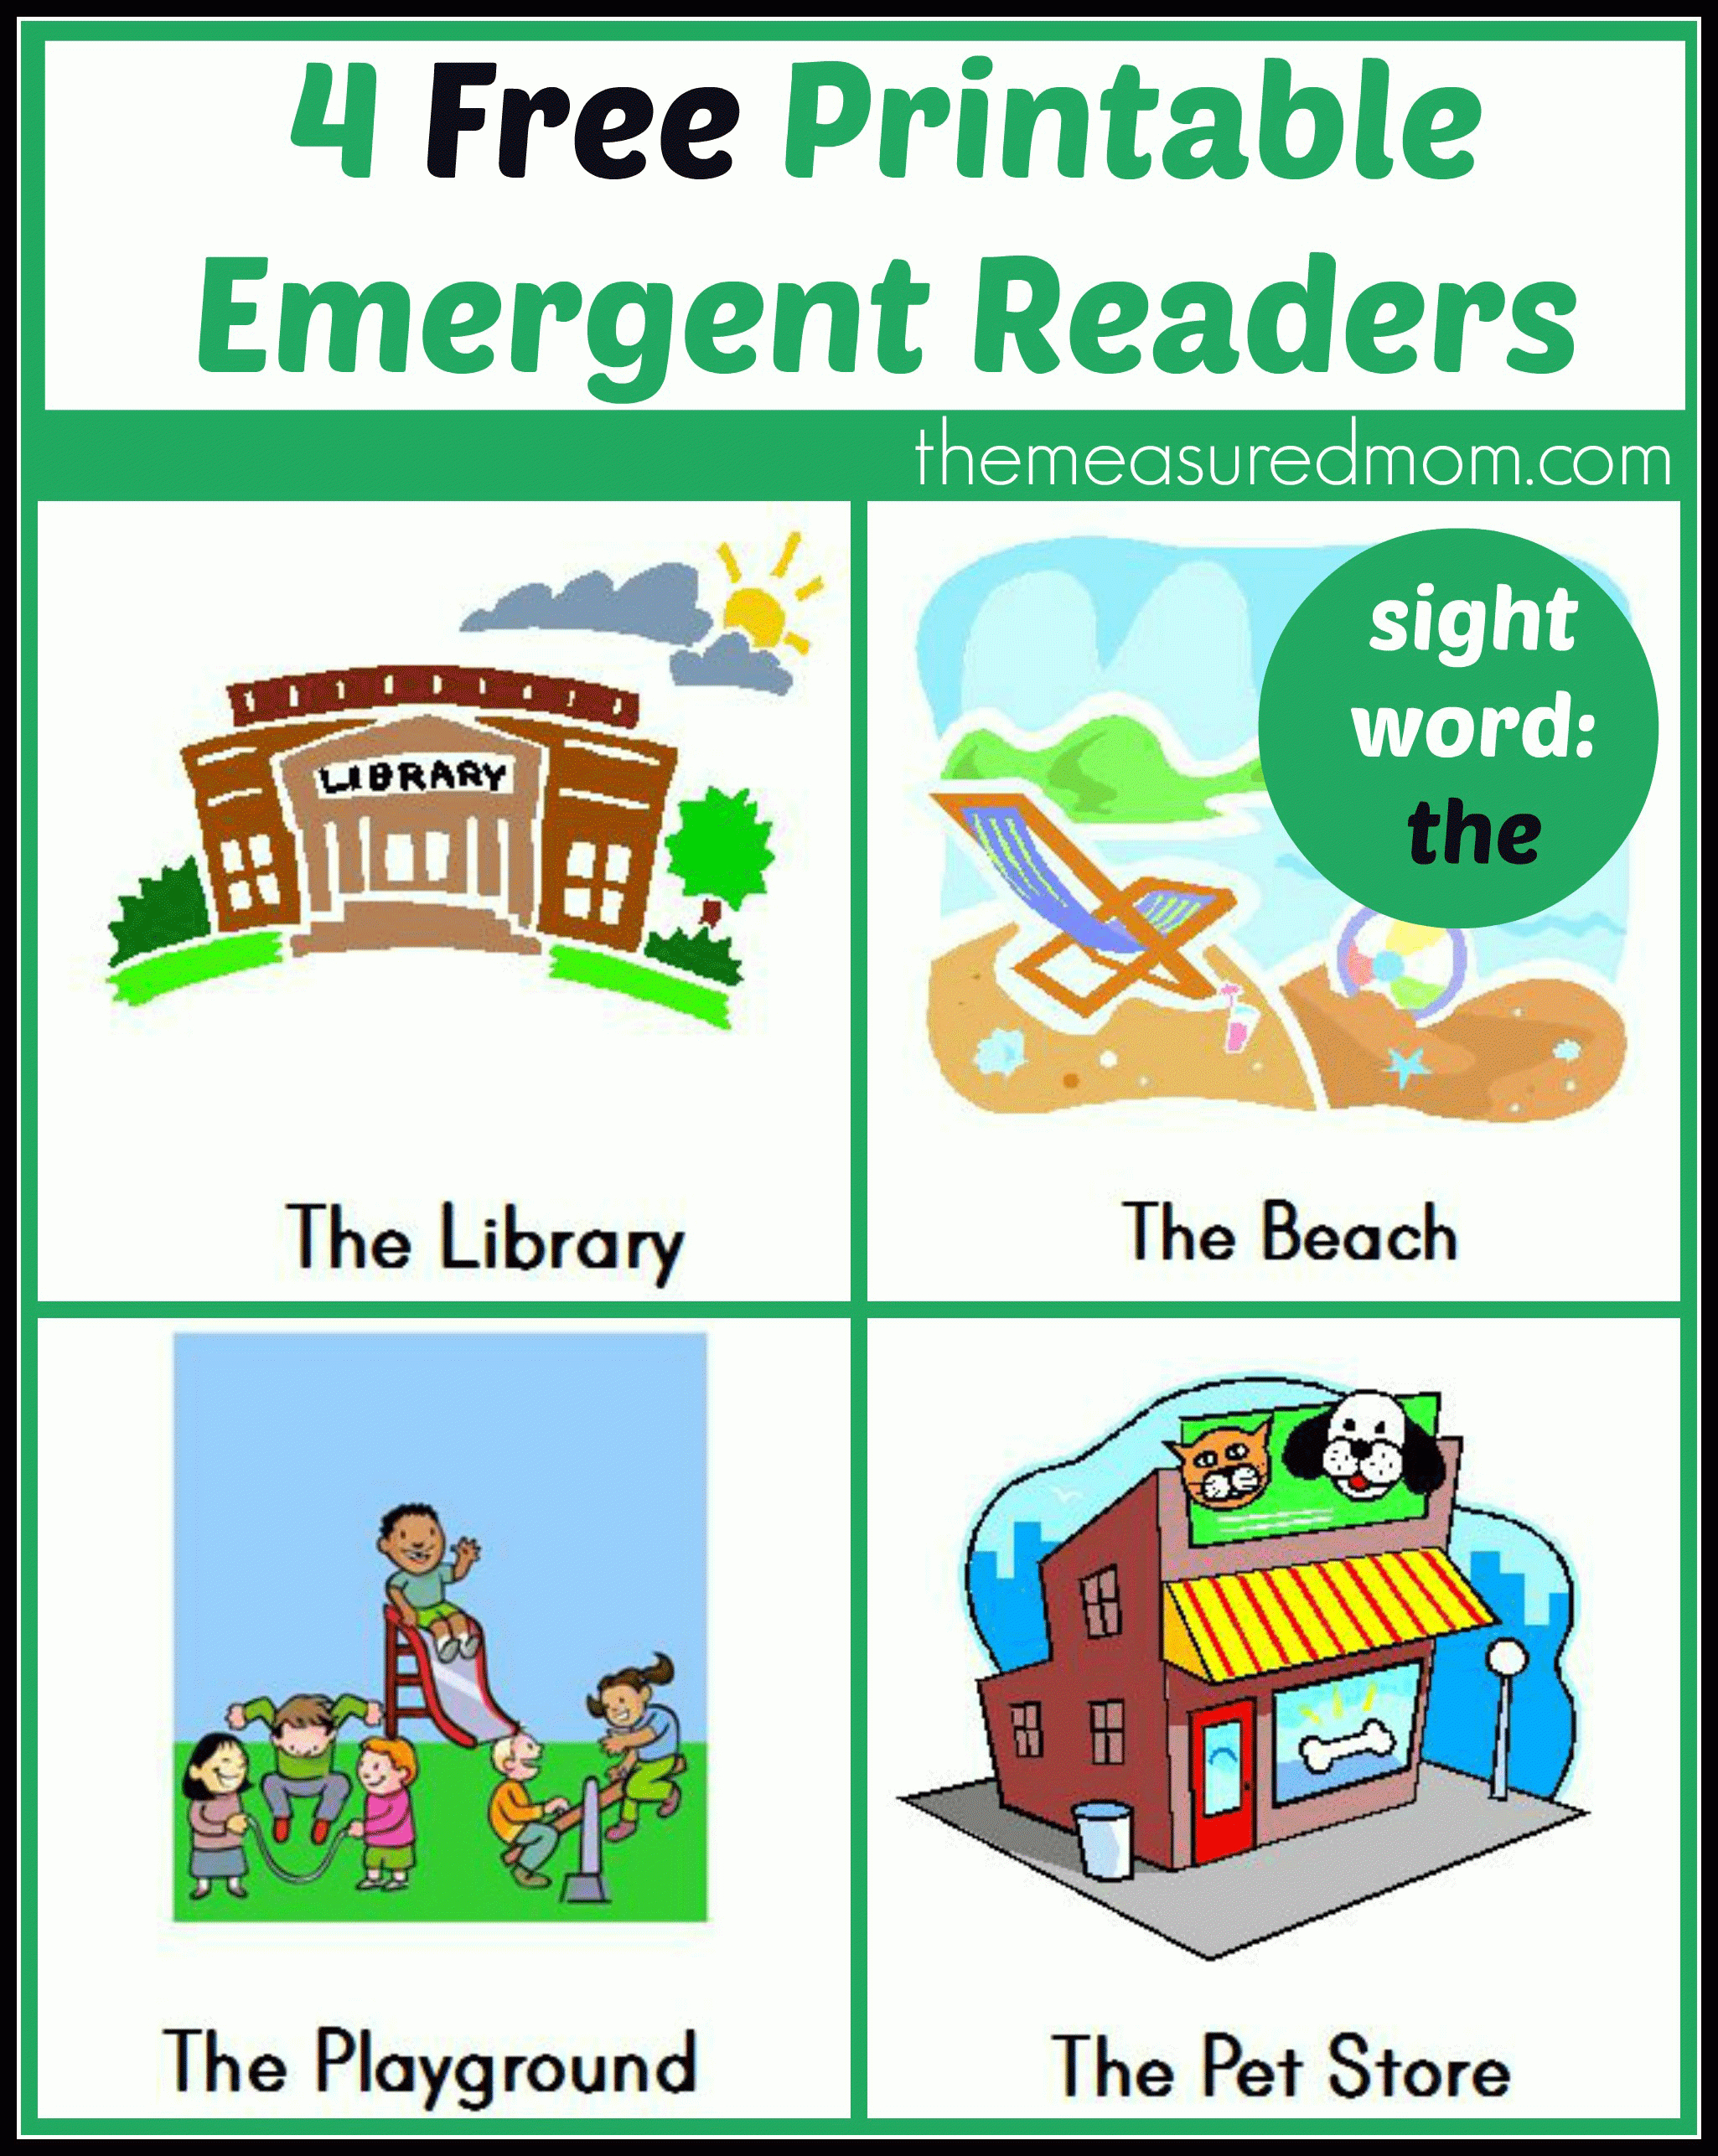 Free Printable Emergent Readers: Sight Word &amp;quot;the&amp;quot; - The Measured Mom - Free Printable Books